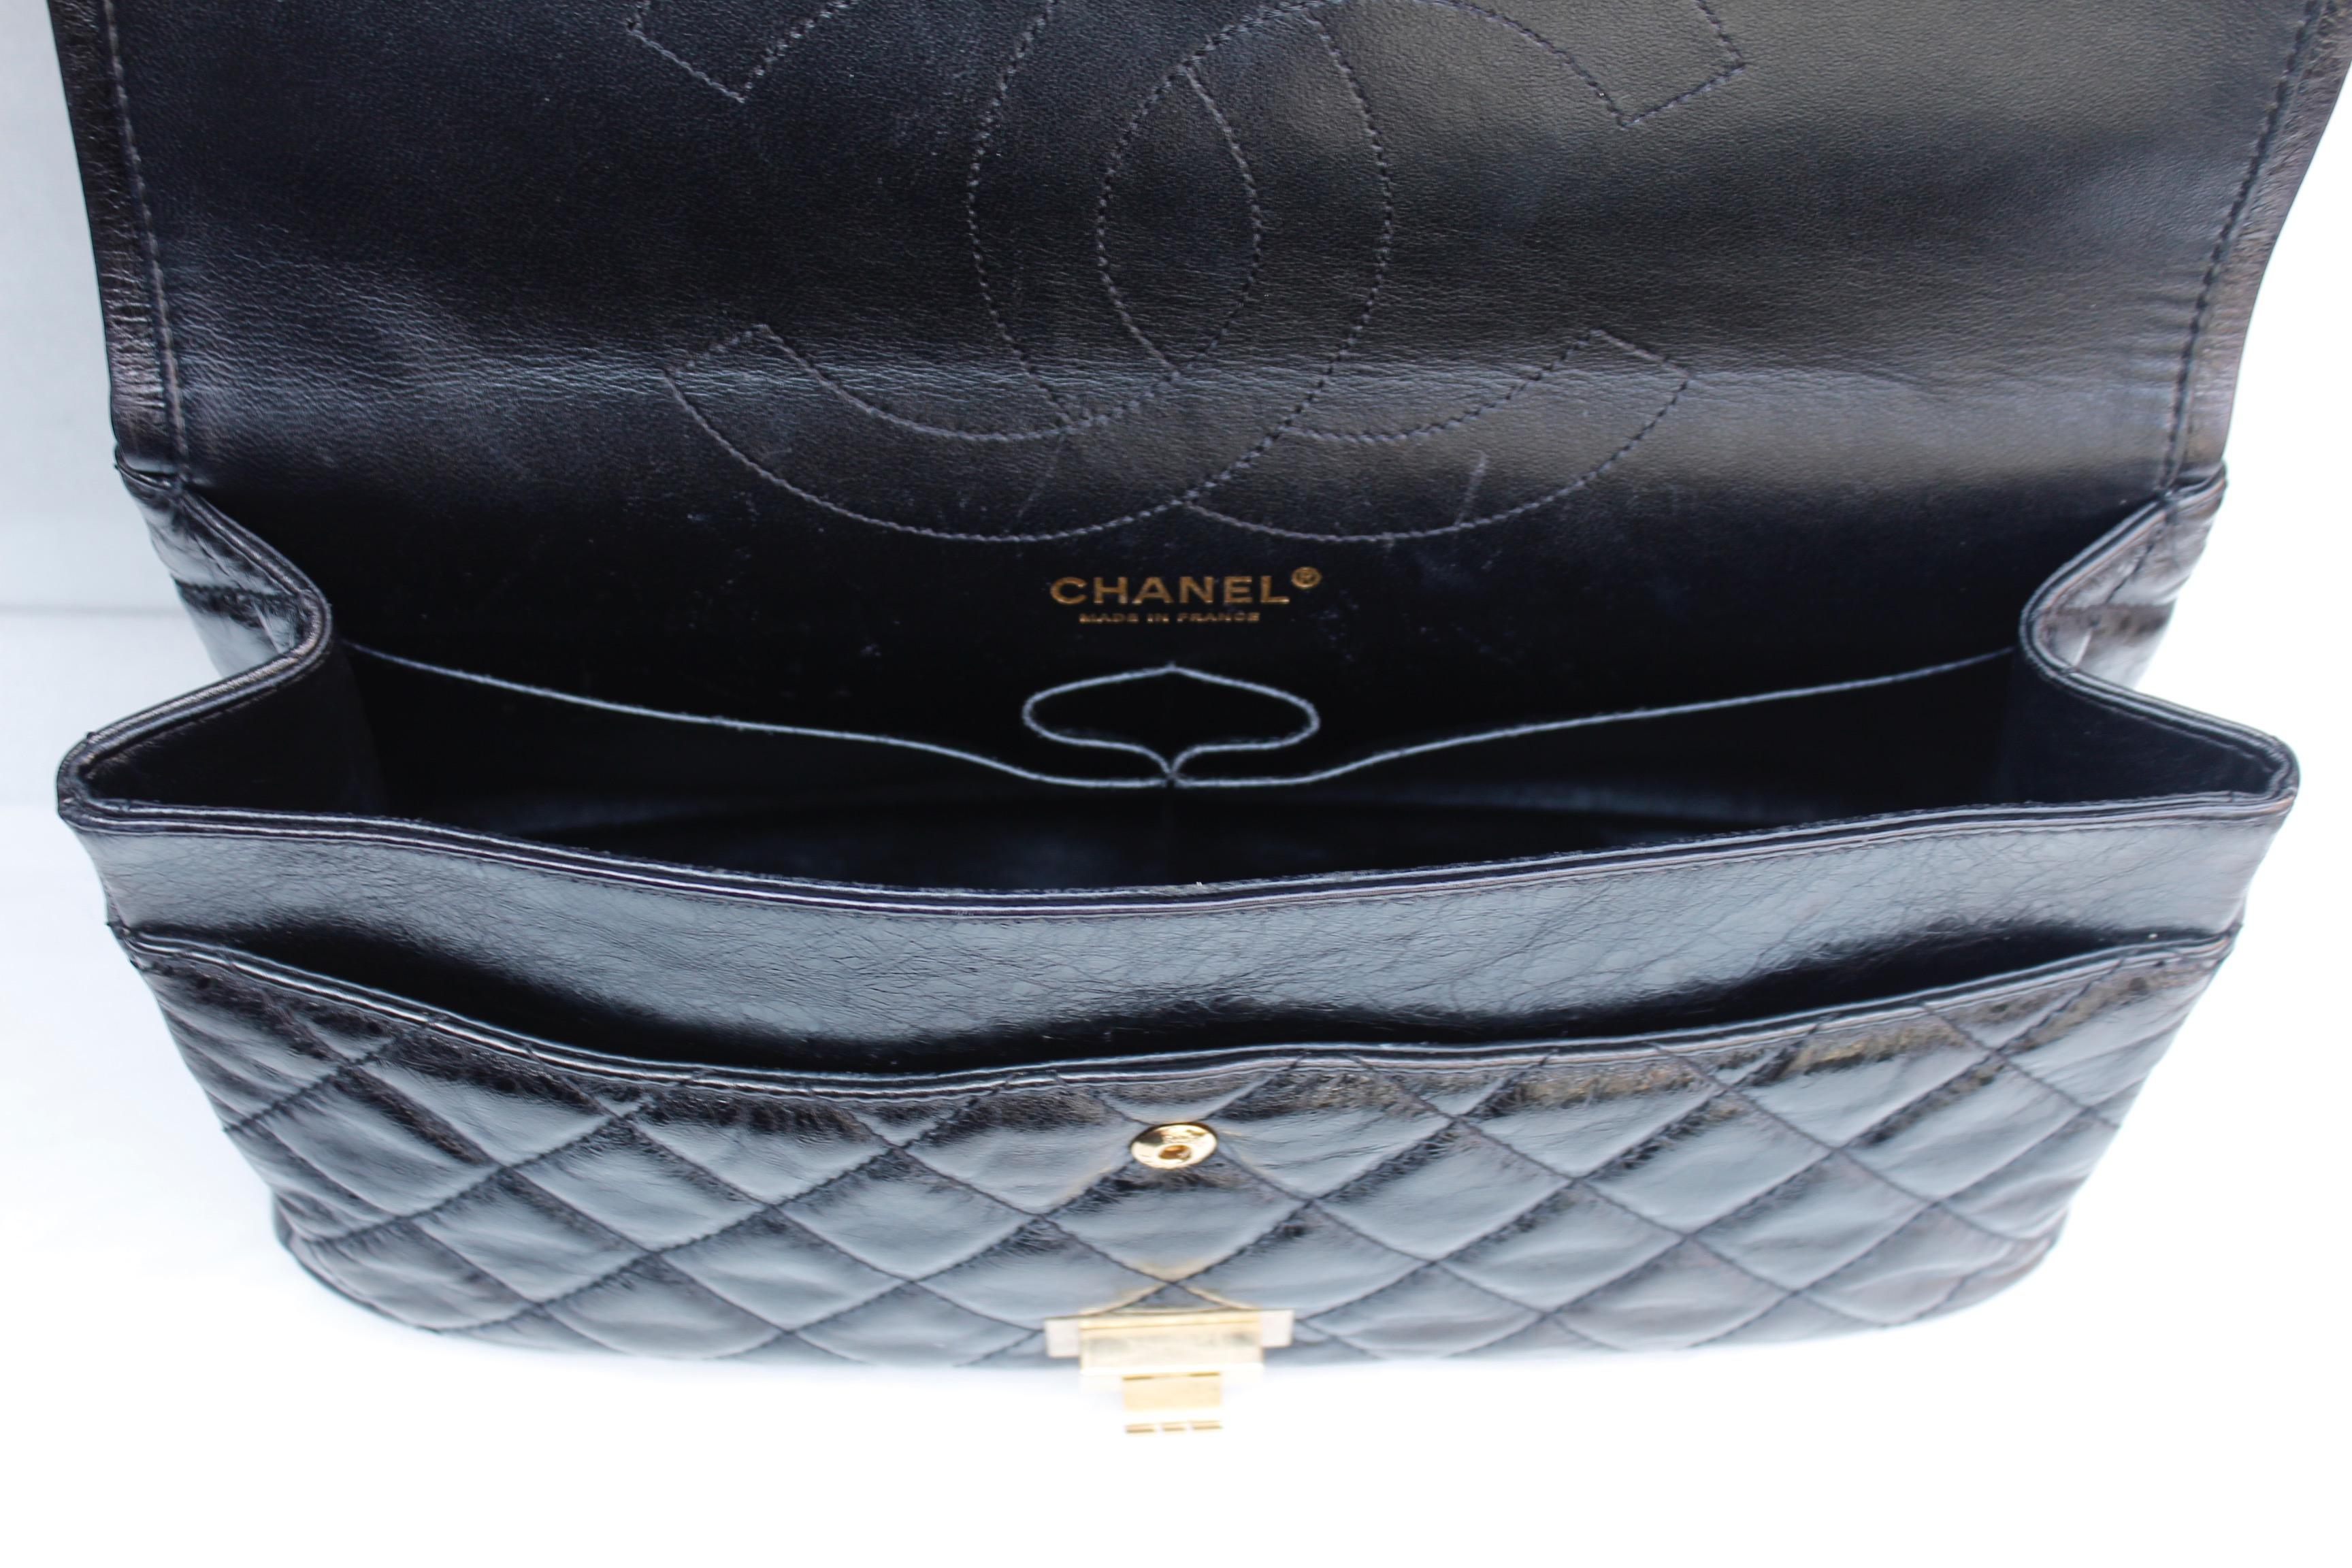 Chanel iconic cracked patent leather 2.55 bag, 2006/2008 For Sale 3